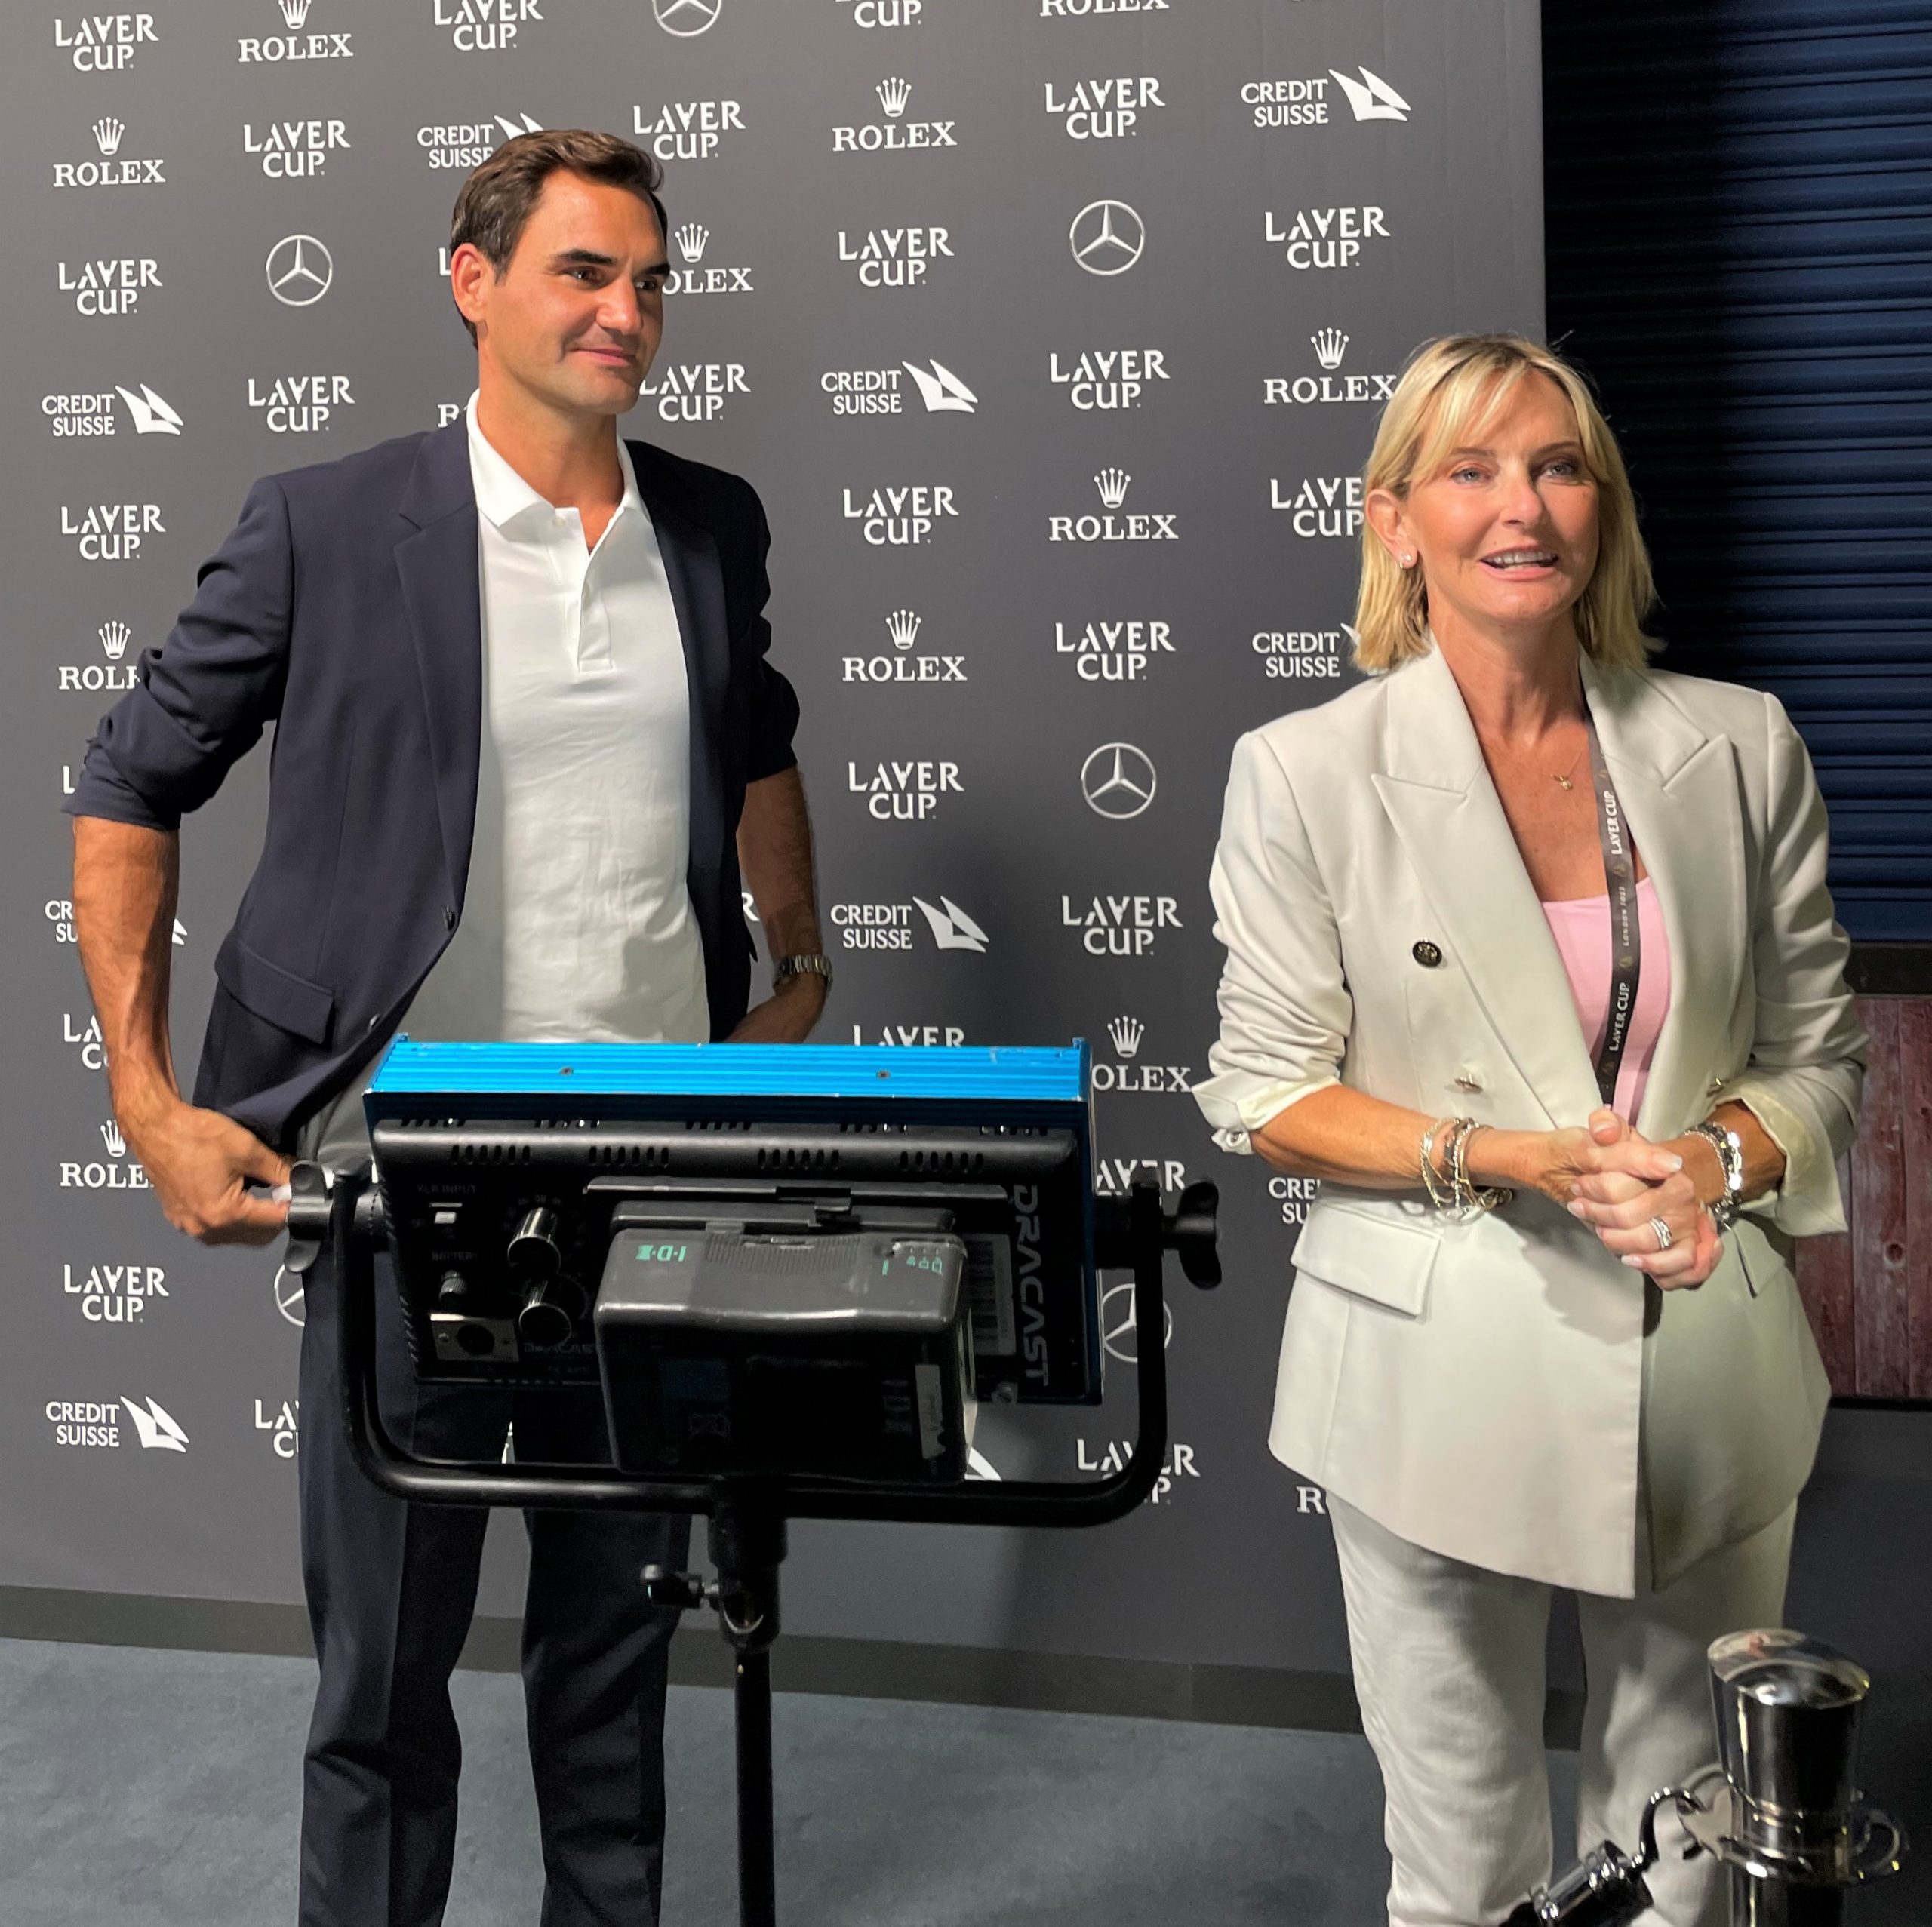 Above - Jacquie Beltrao at work with Roger Federer